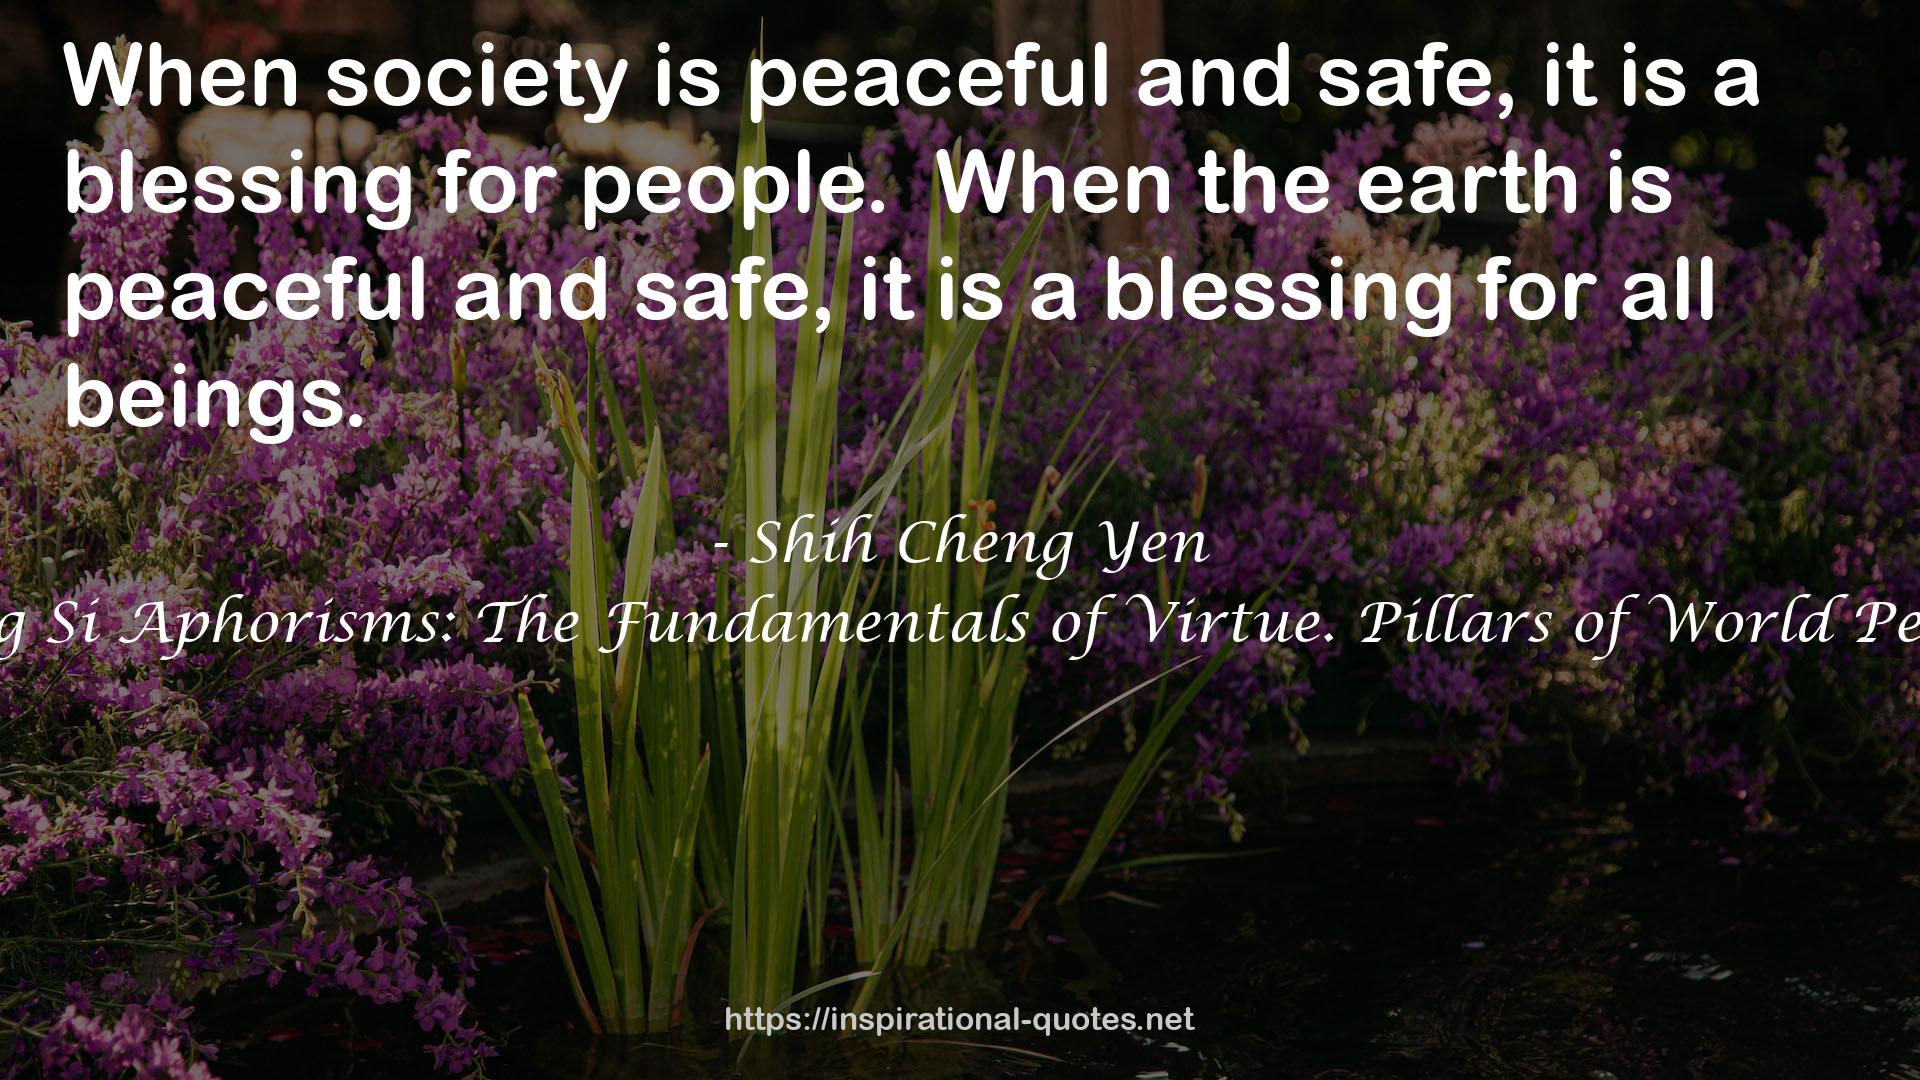 Jing Si Aphorisms: The Fundamentals of Virtue. Pillars of World Peace QUOTES